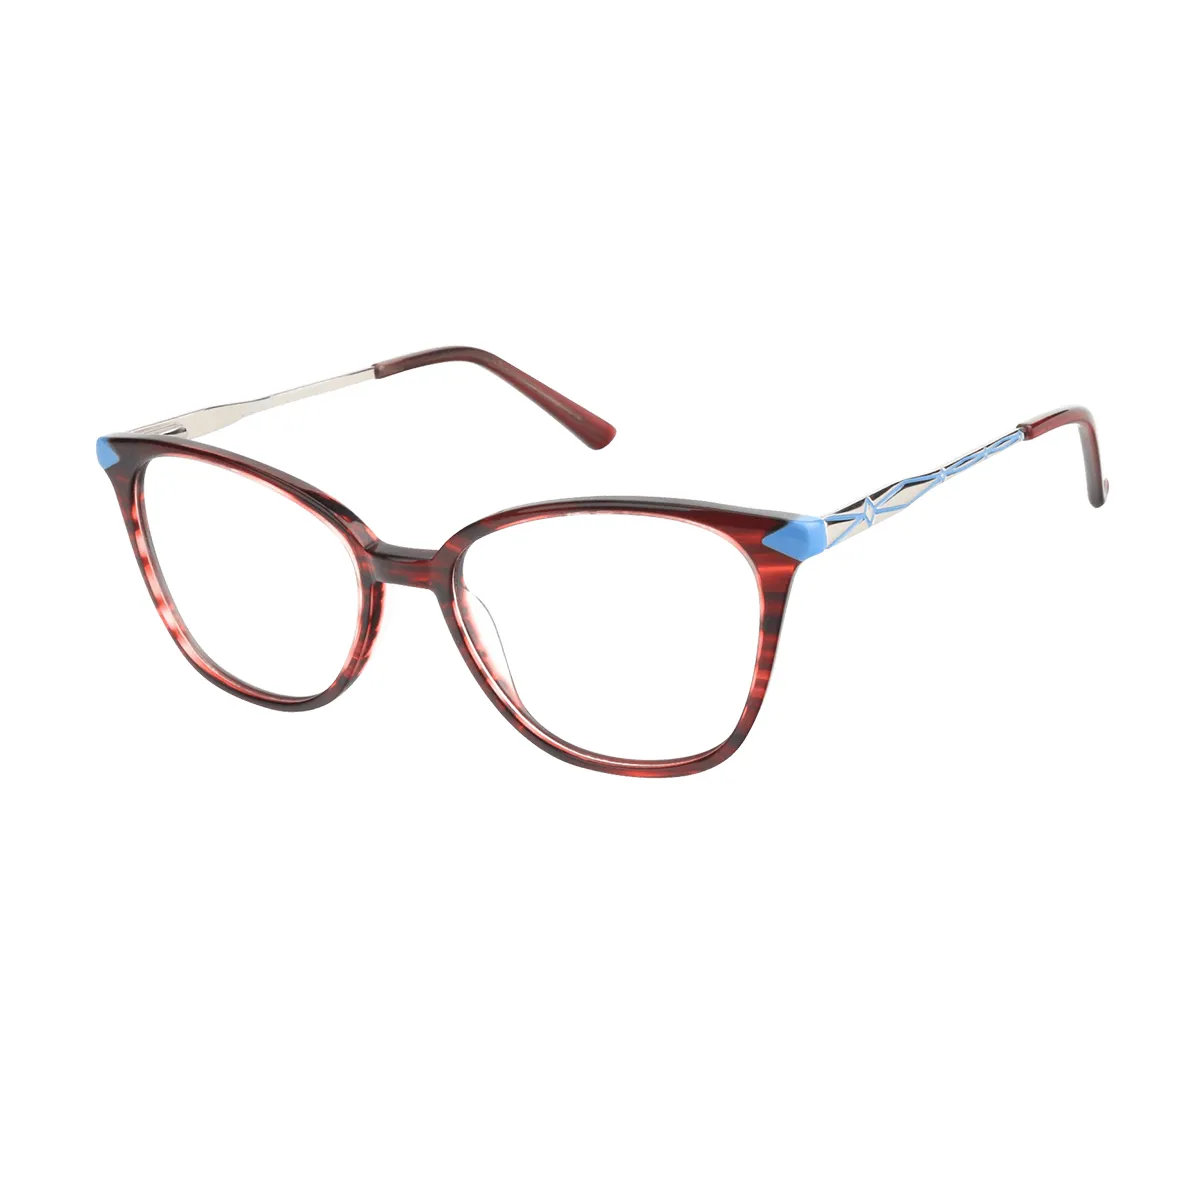 Fashion Square Red-blue Glasses for Women